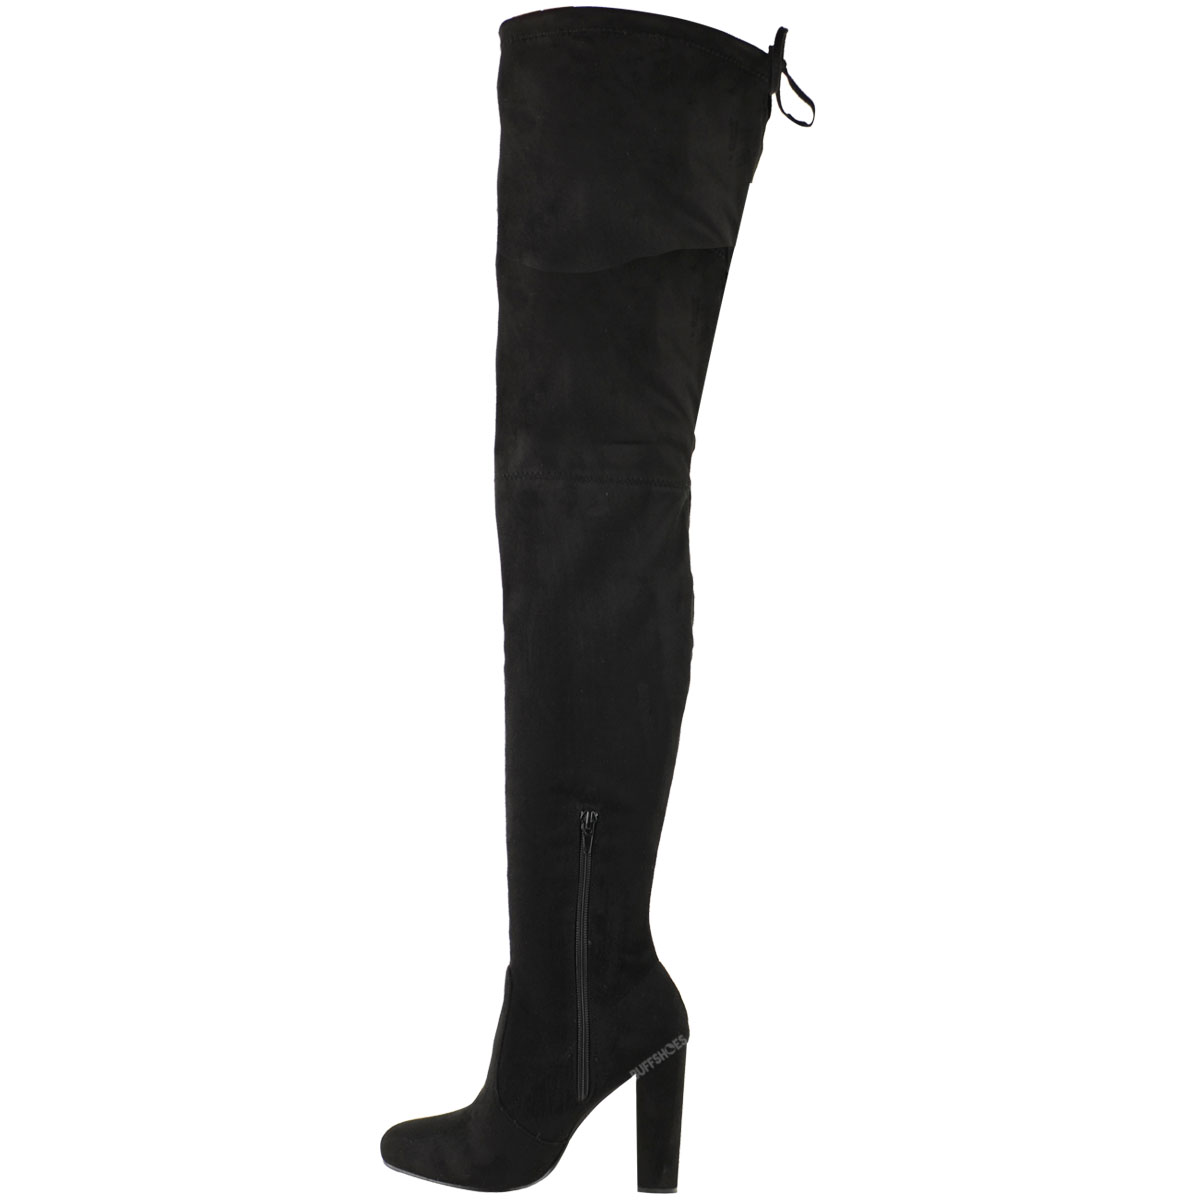 OVER THE KNEE THIGH HIGH BOOTS WOMENS LADIES EXTRA TALL STRETCH BLOCK ...